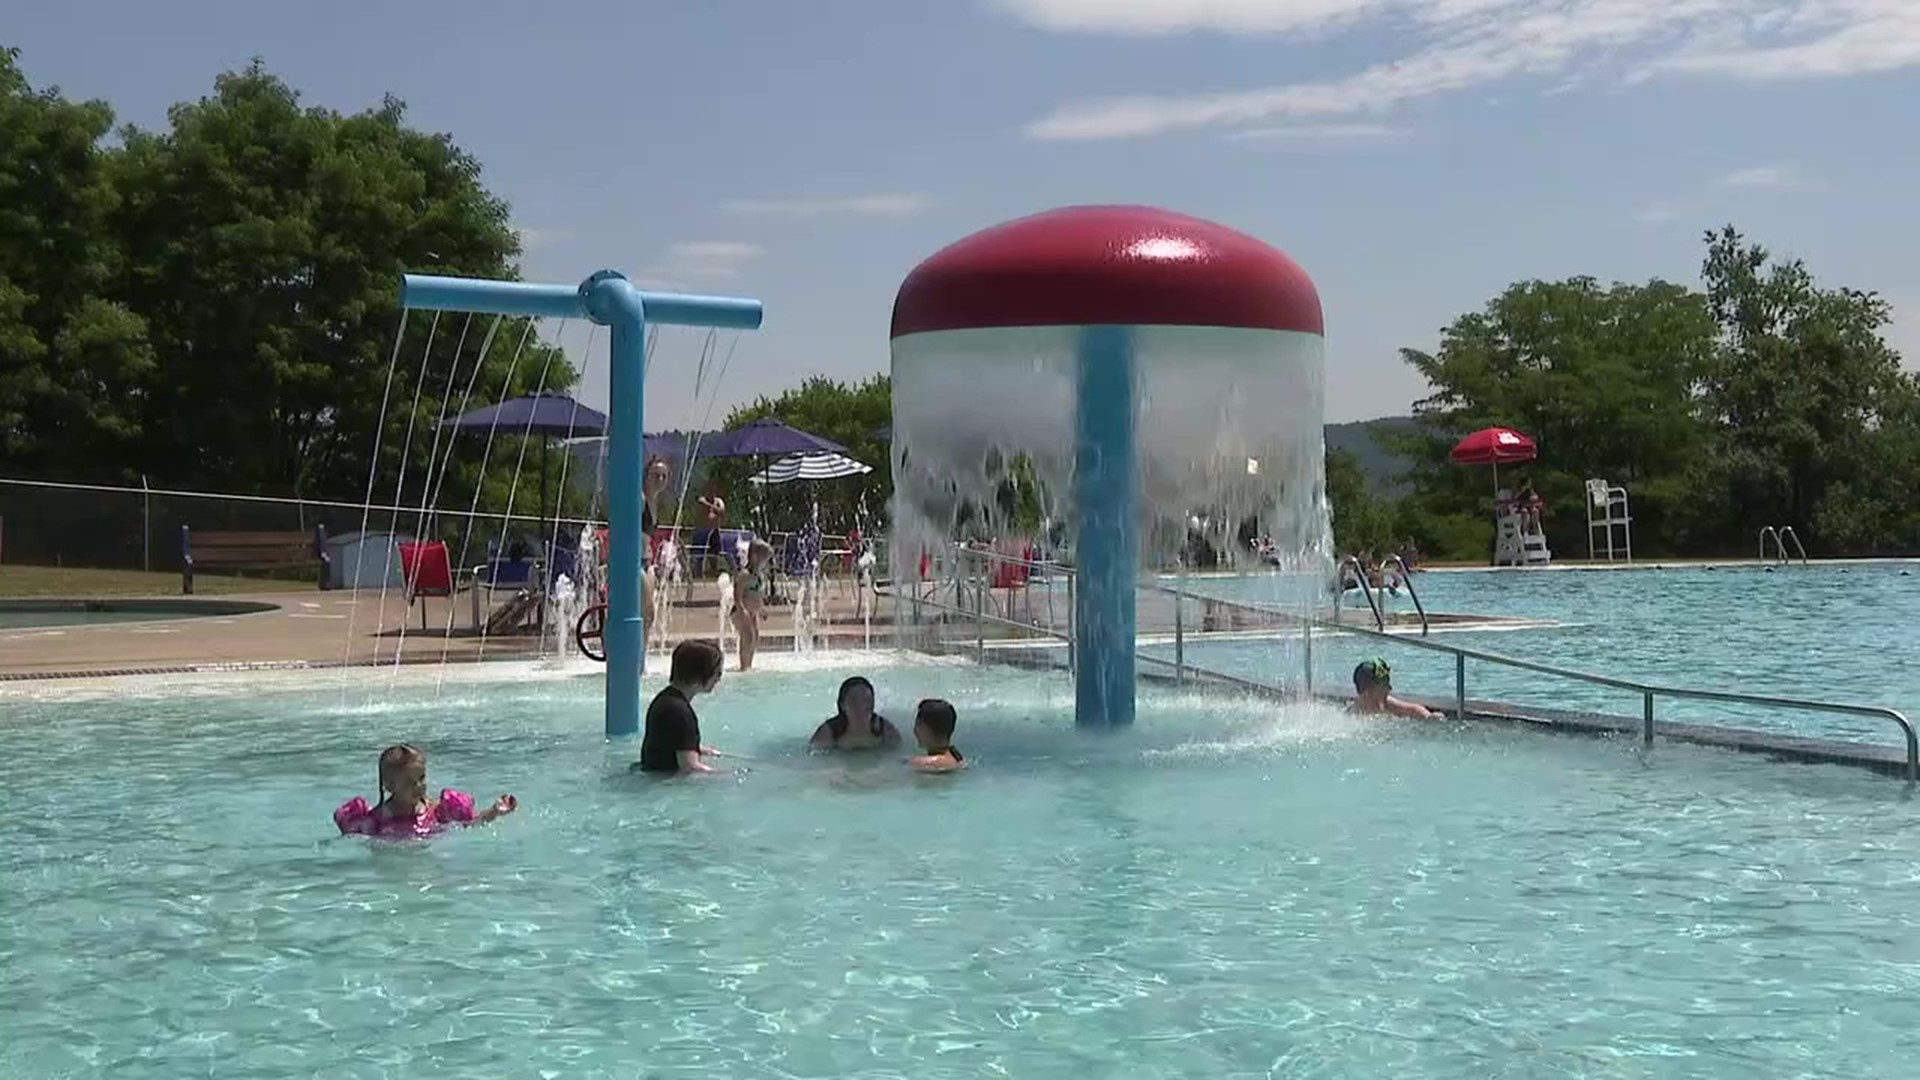 The pool still needs about $200,000 in repairs and is raising money.